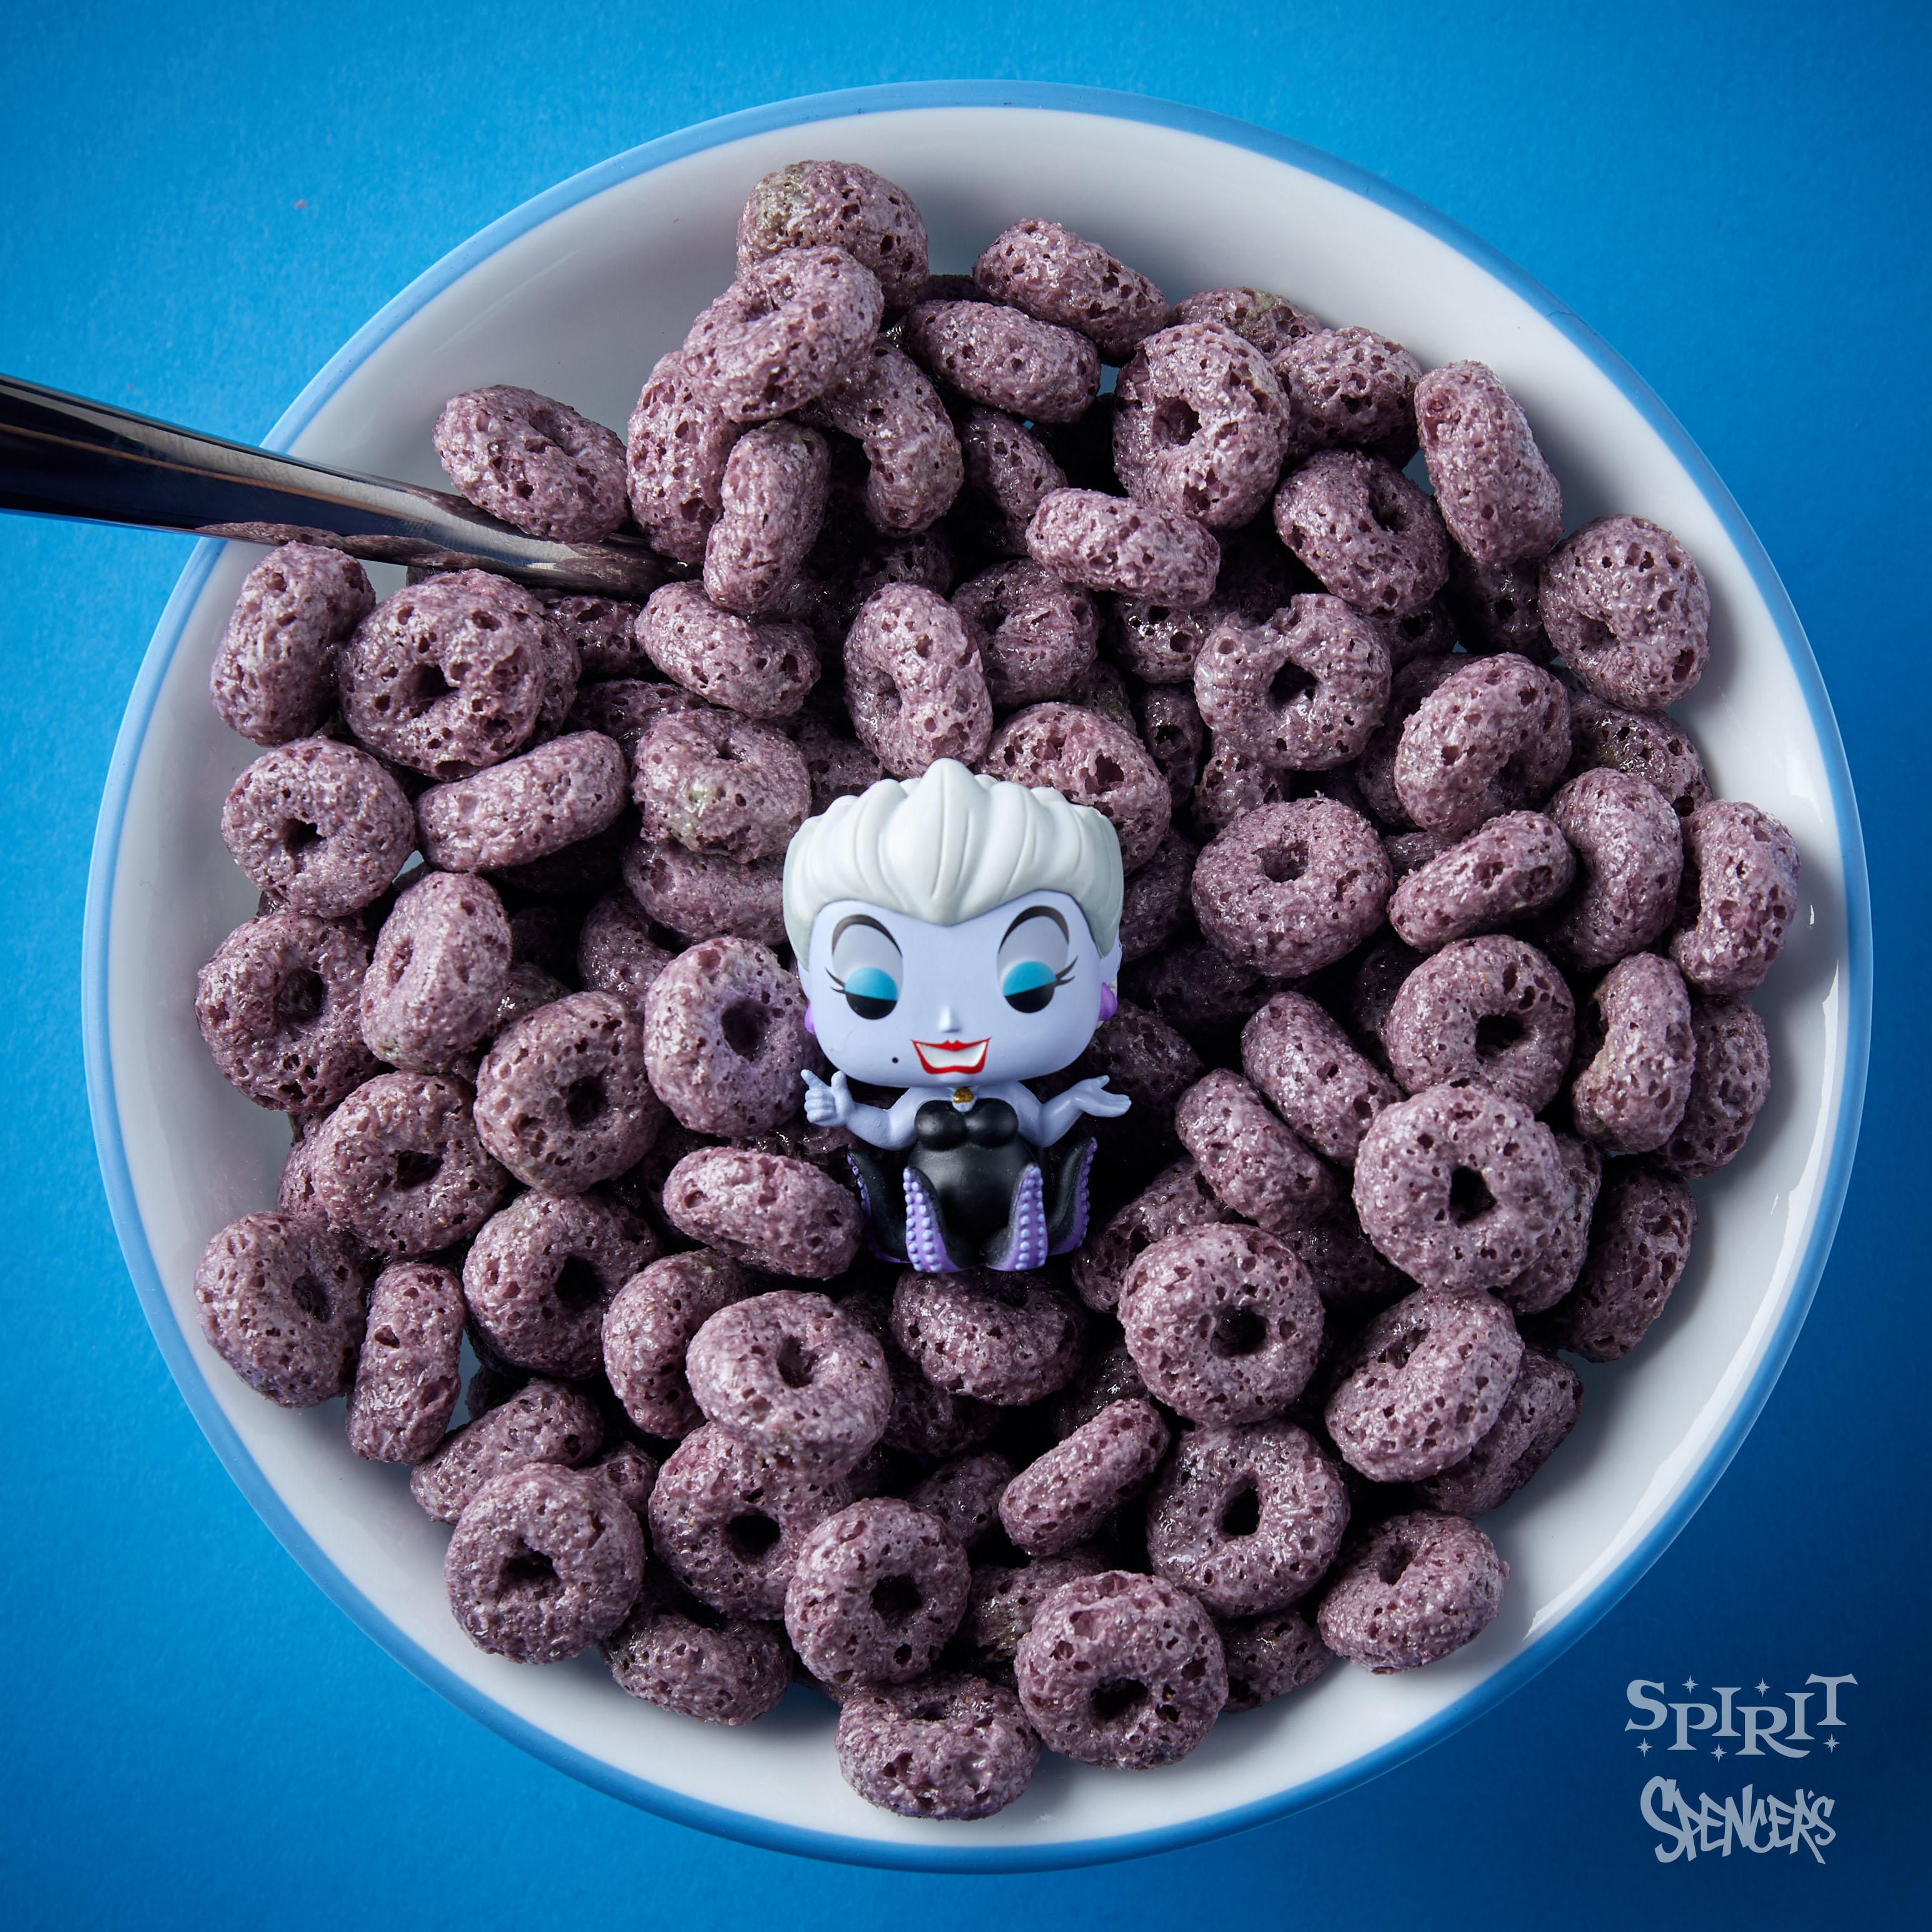 Disney Villains FunkOs Cereal Just In Time For Halloween